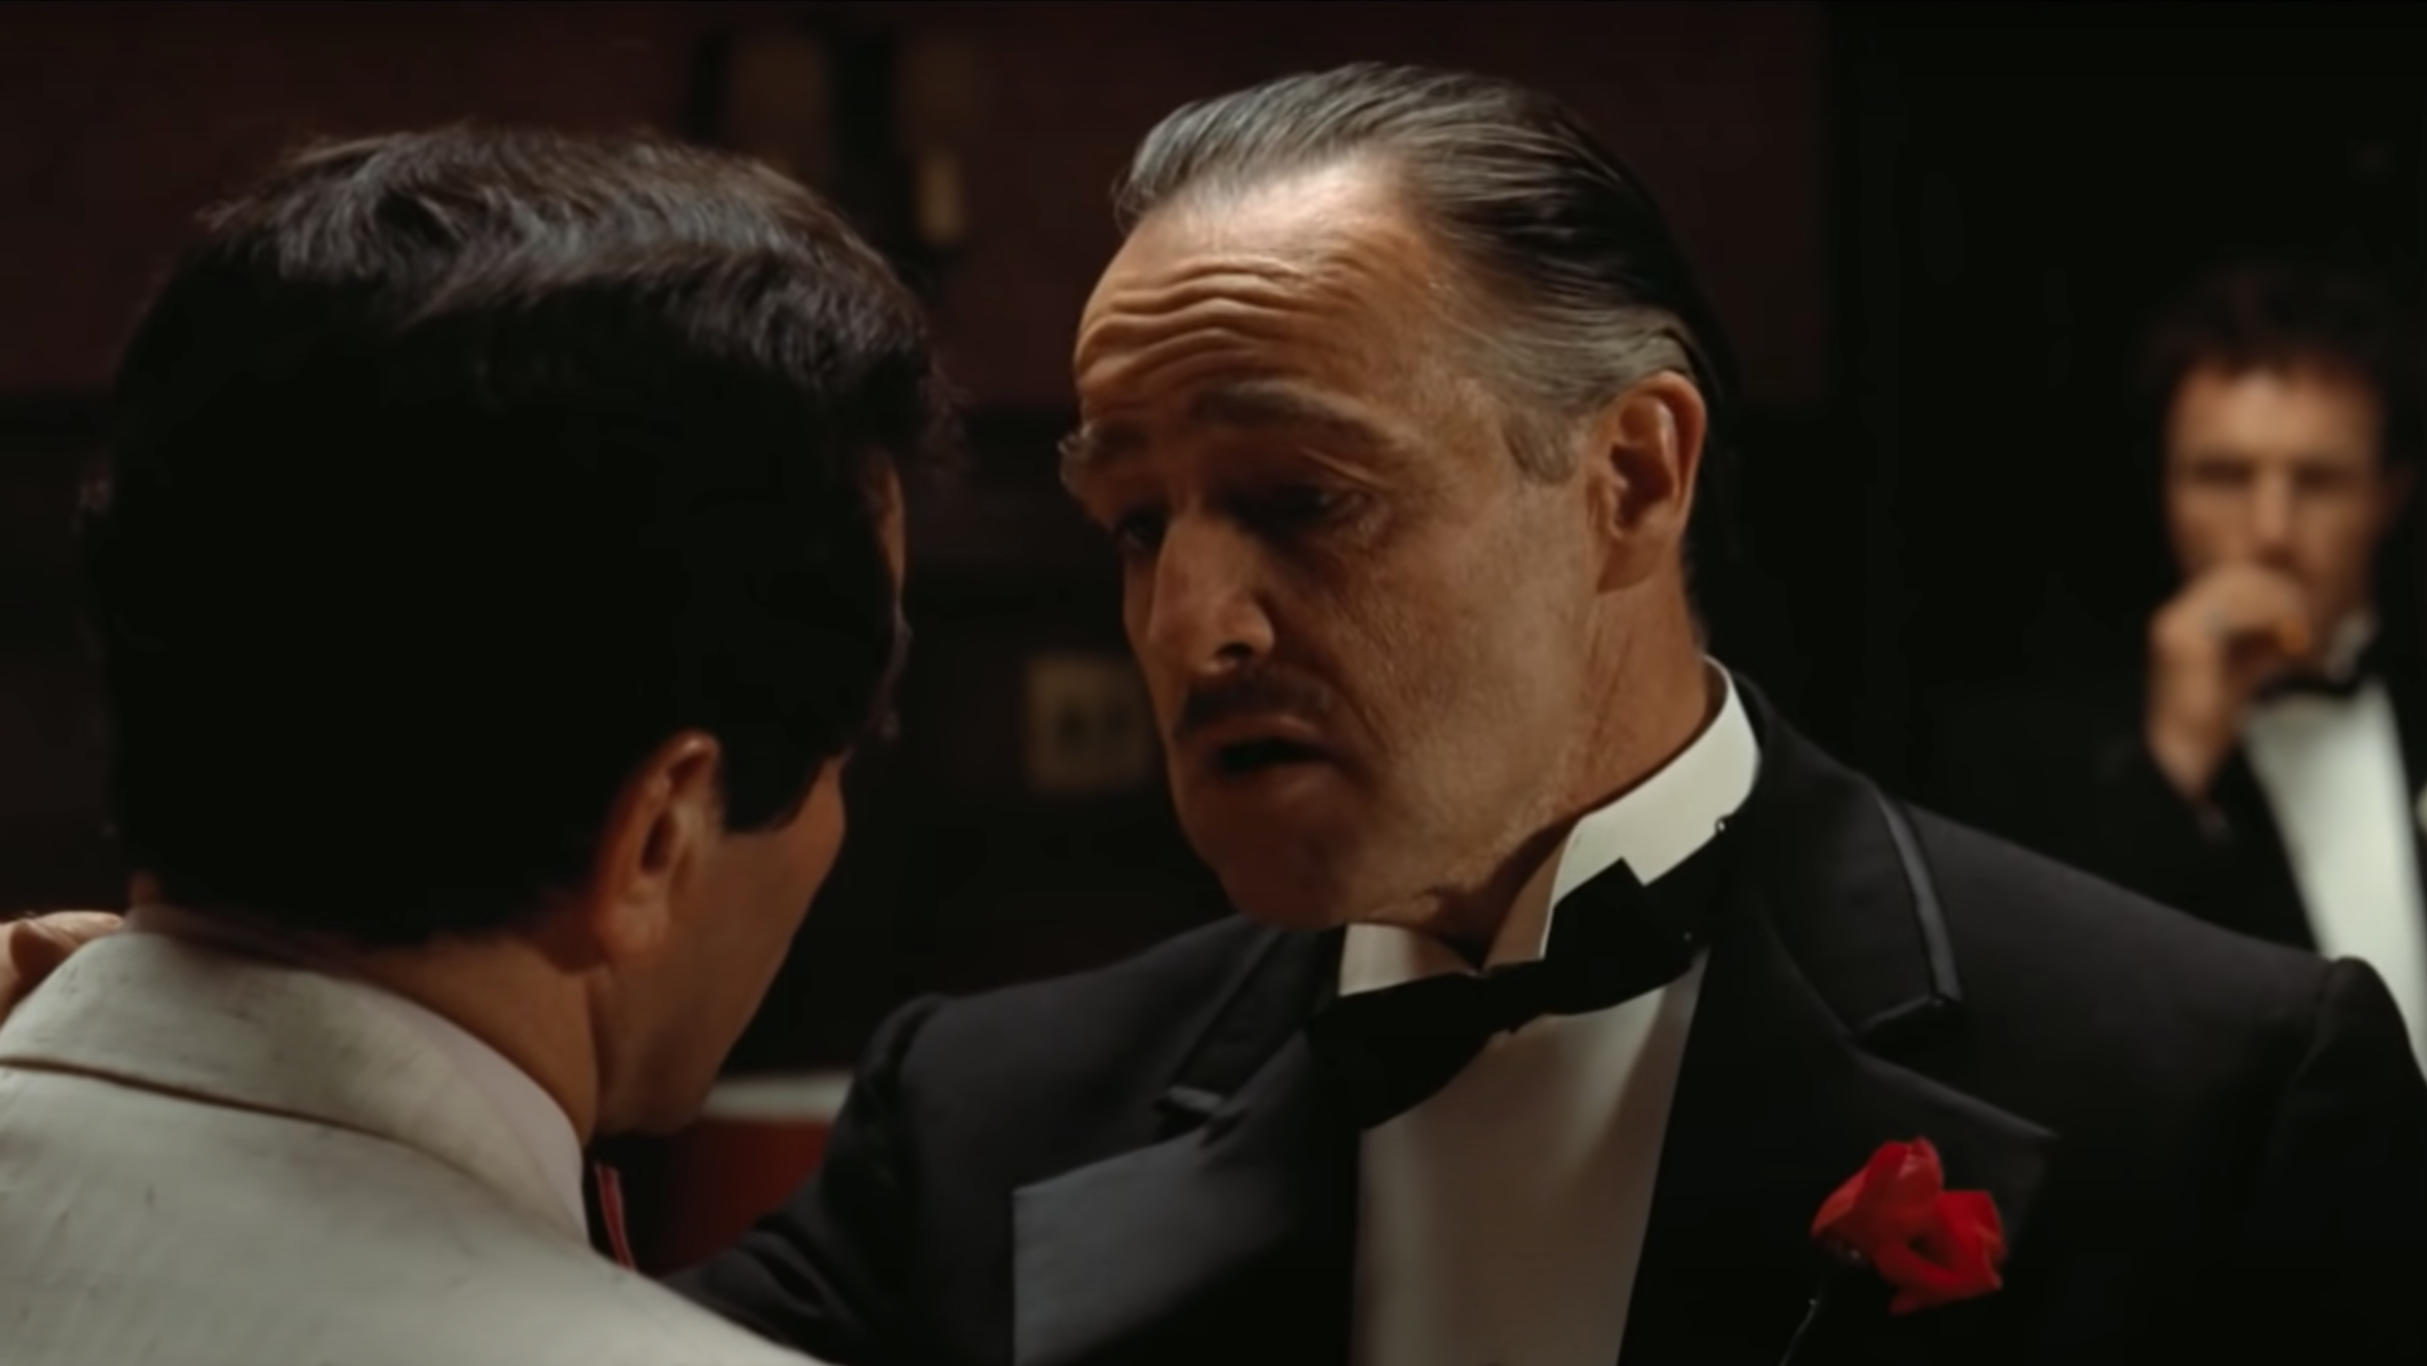 The Godfather is returning to cinemas for its 50th anniversary